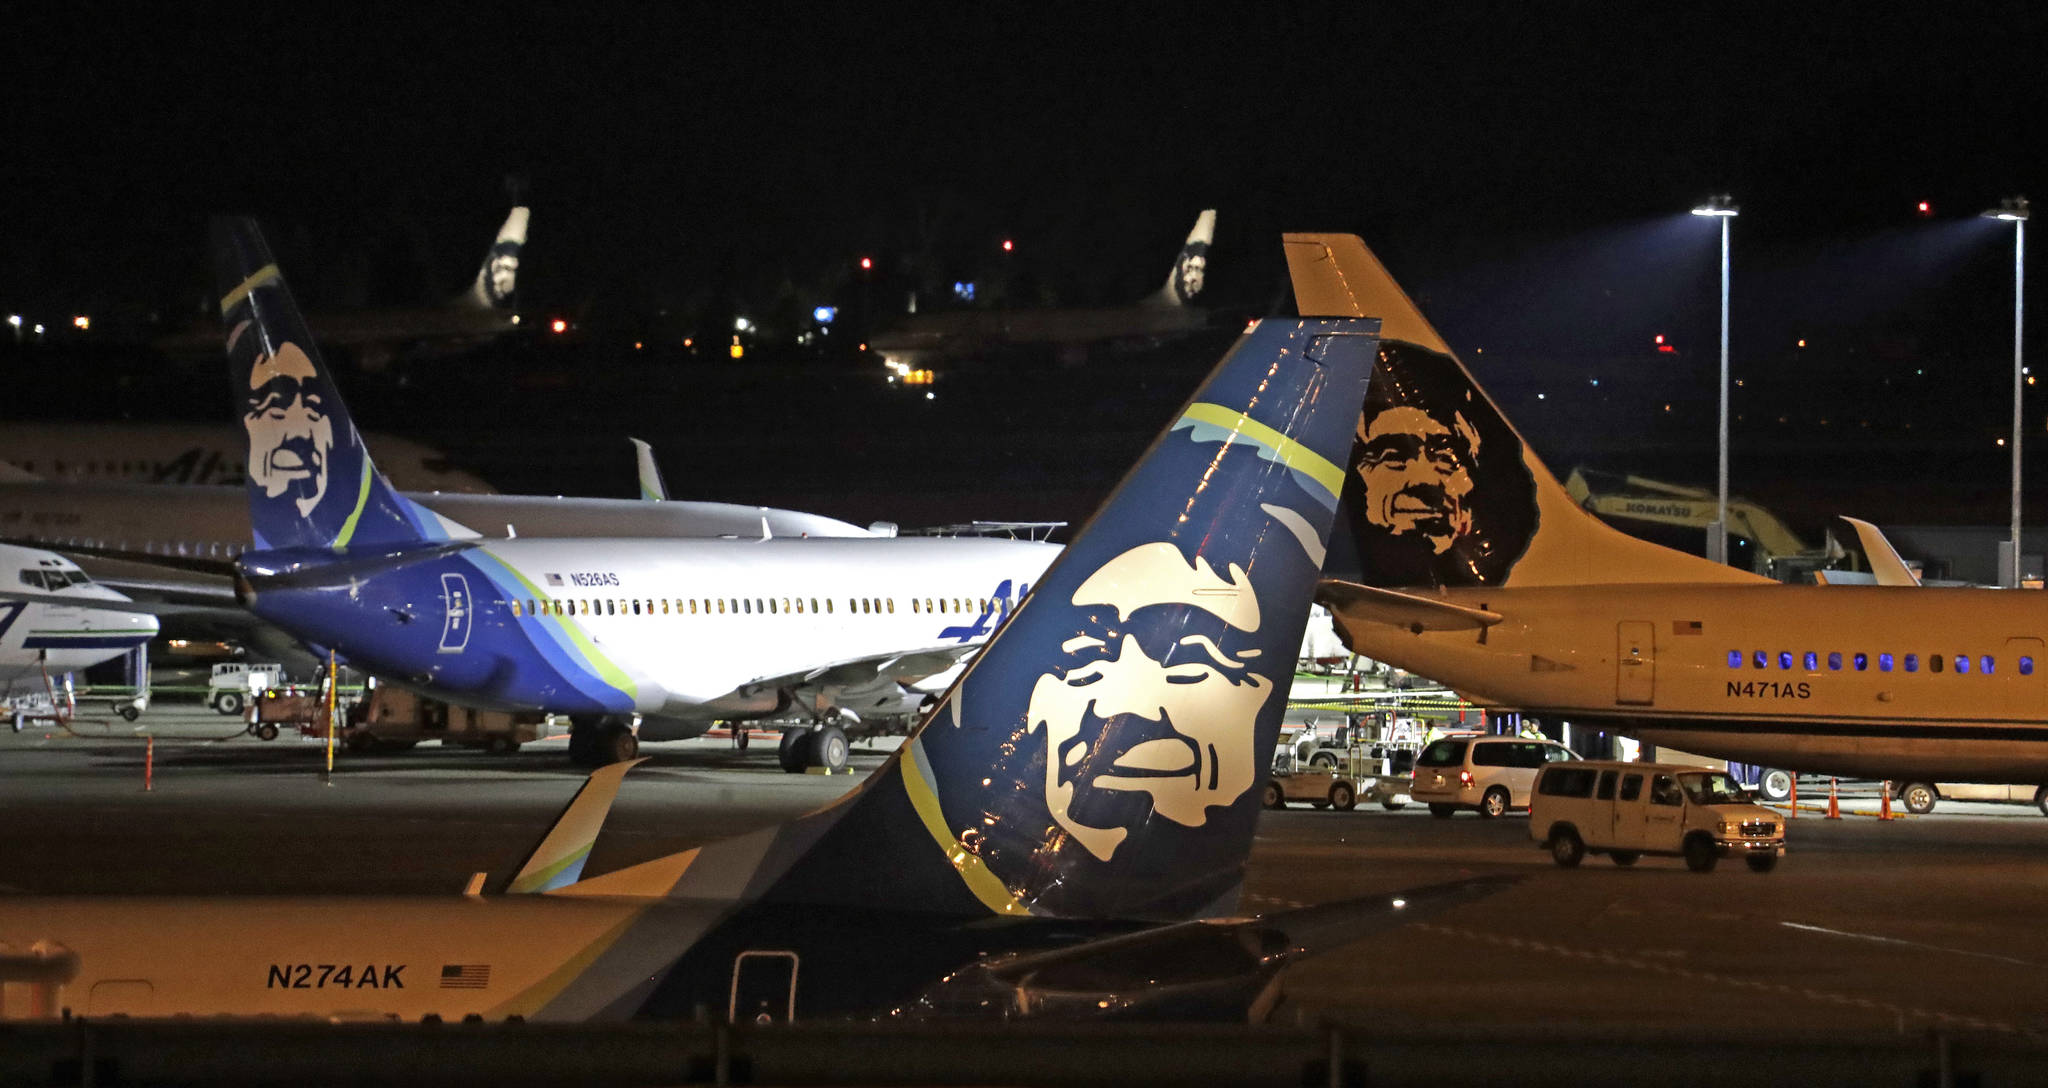 In this August 2018 photo, Alaska Airlines planes sit on the tarmac at Sea-Tac International Airport in SeaTac, Wash. Officials say an Alaska Airlines jetliner struck a brown bear while landing early Saturday evening, Nov. 14, 2020, killing the animal and causing damage to the plane. (AP Photo / Elaine Thompson)